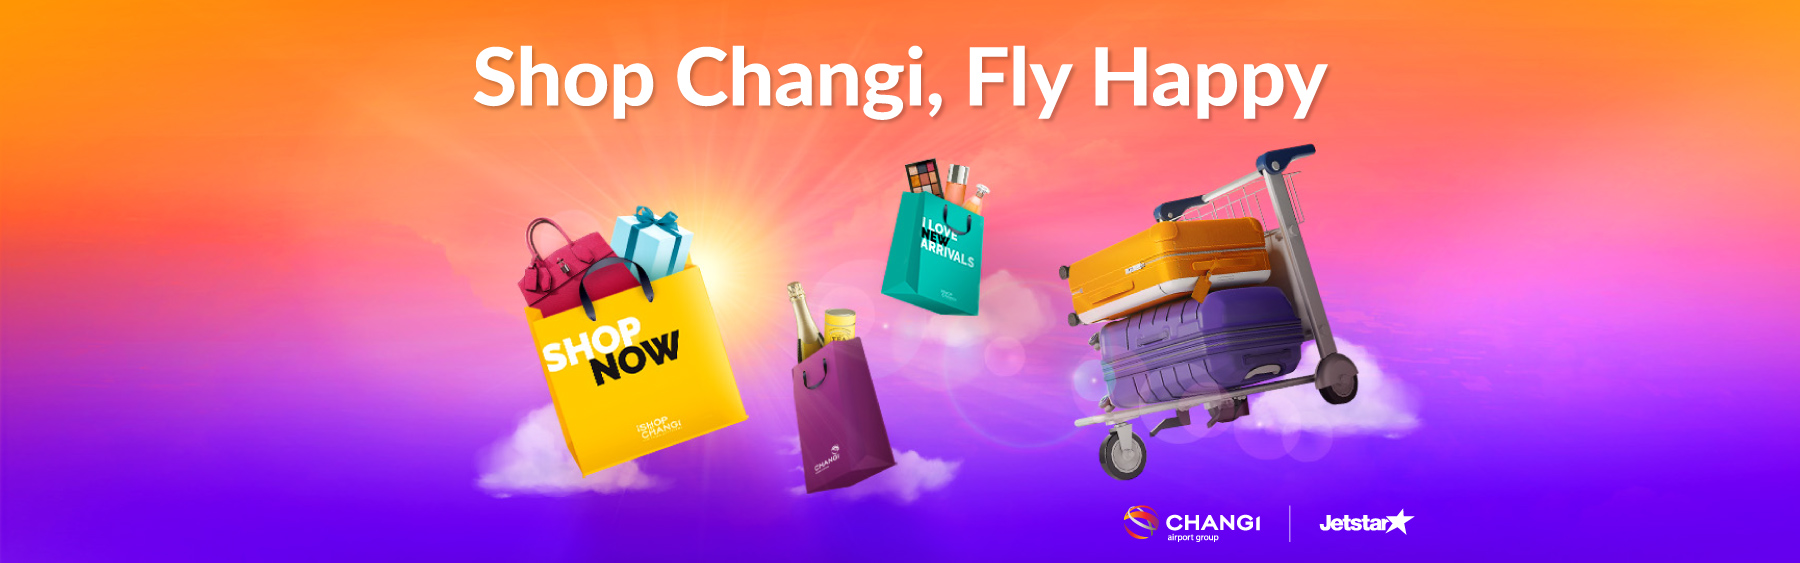 shop changi fly happy jetstar promotion at changi airport